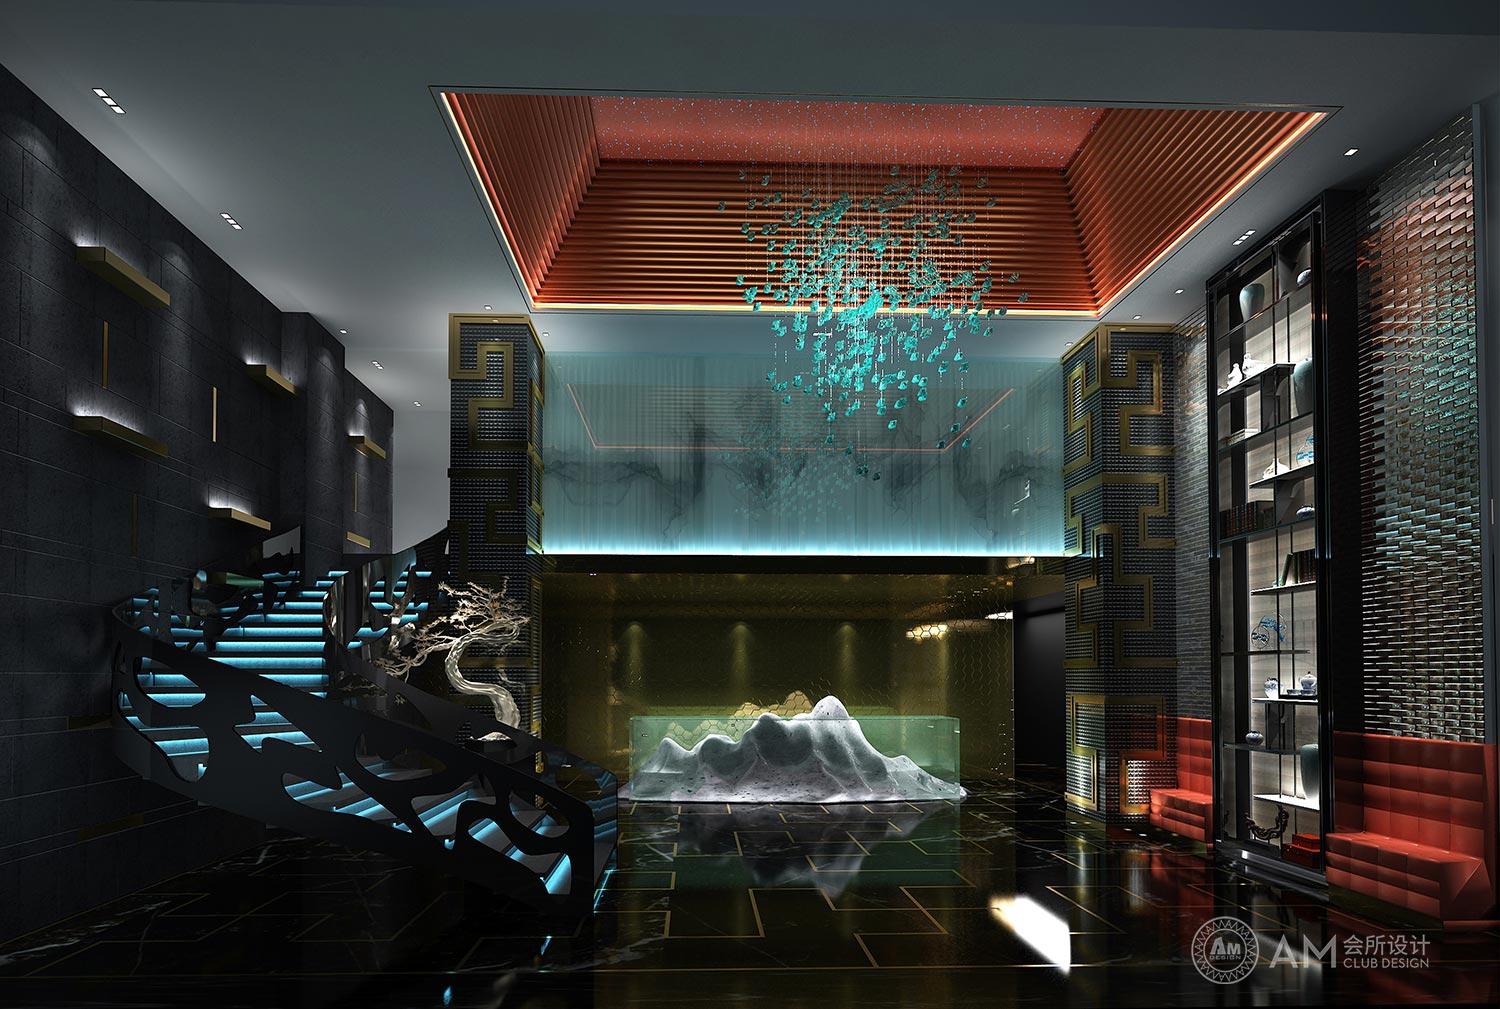 AM DESIGN | Lobby & staircase design of Top Spa Club in Joy City